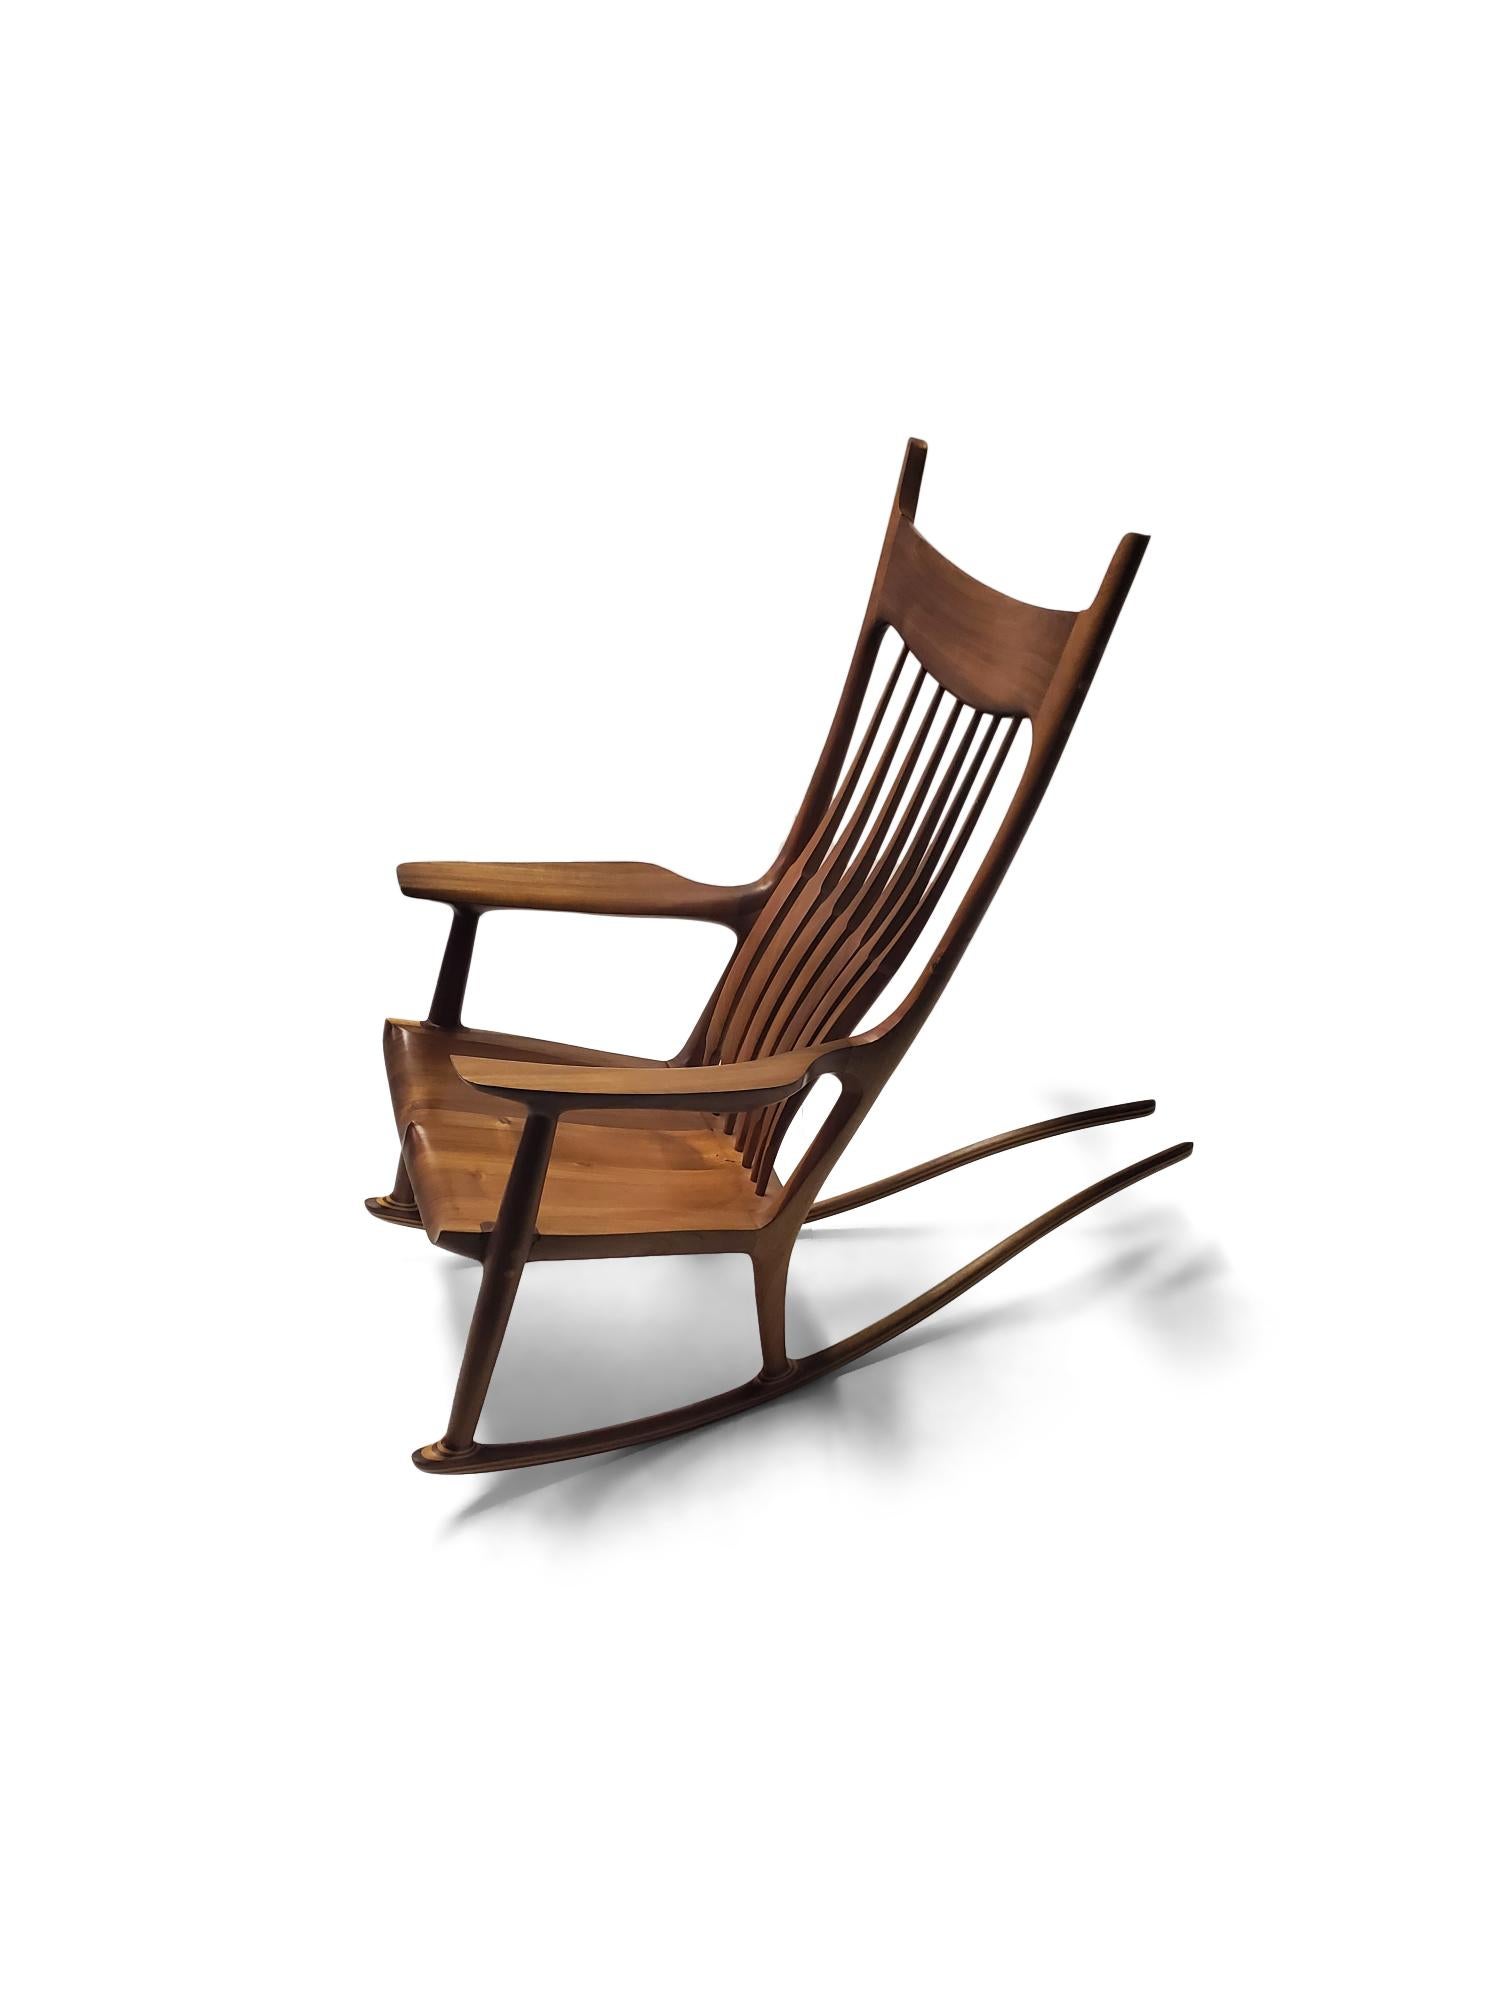 American Vintage Sam Maloof Style Rocking Chair  For Sale